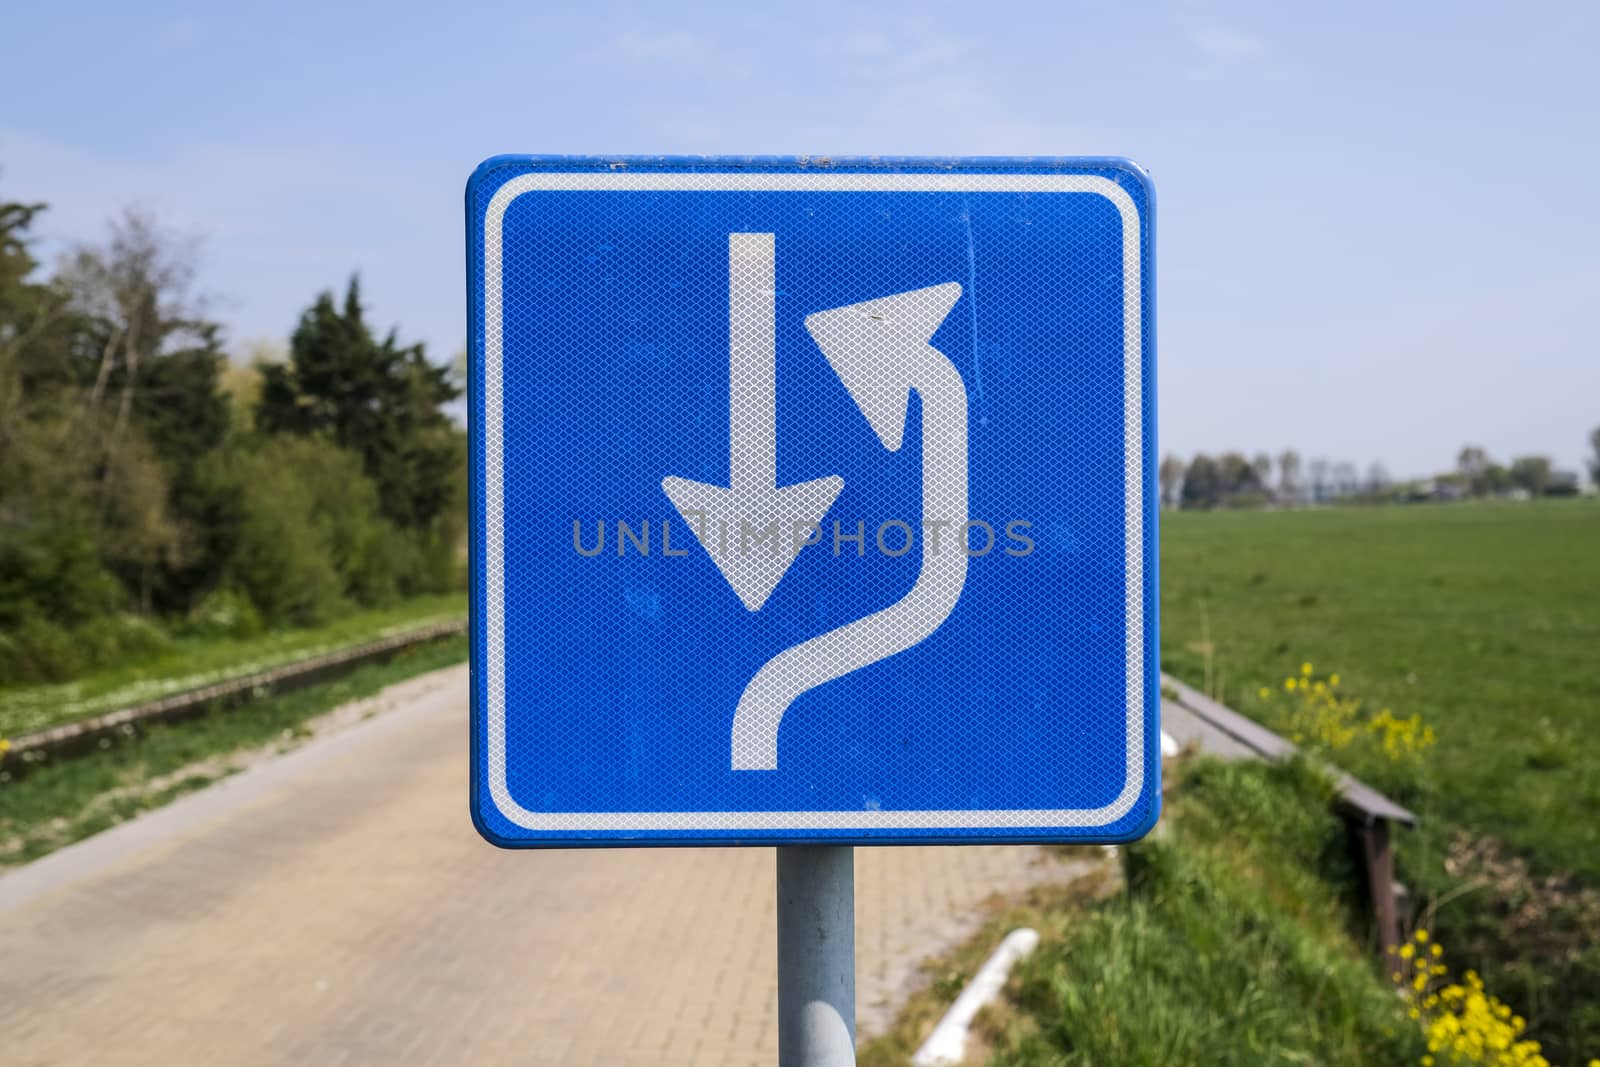 Sign traffic concept, place to pass oncoming traffic by Tjeerdkruse